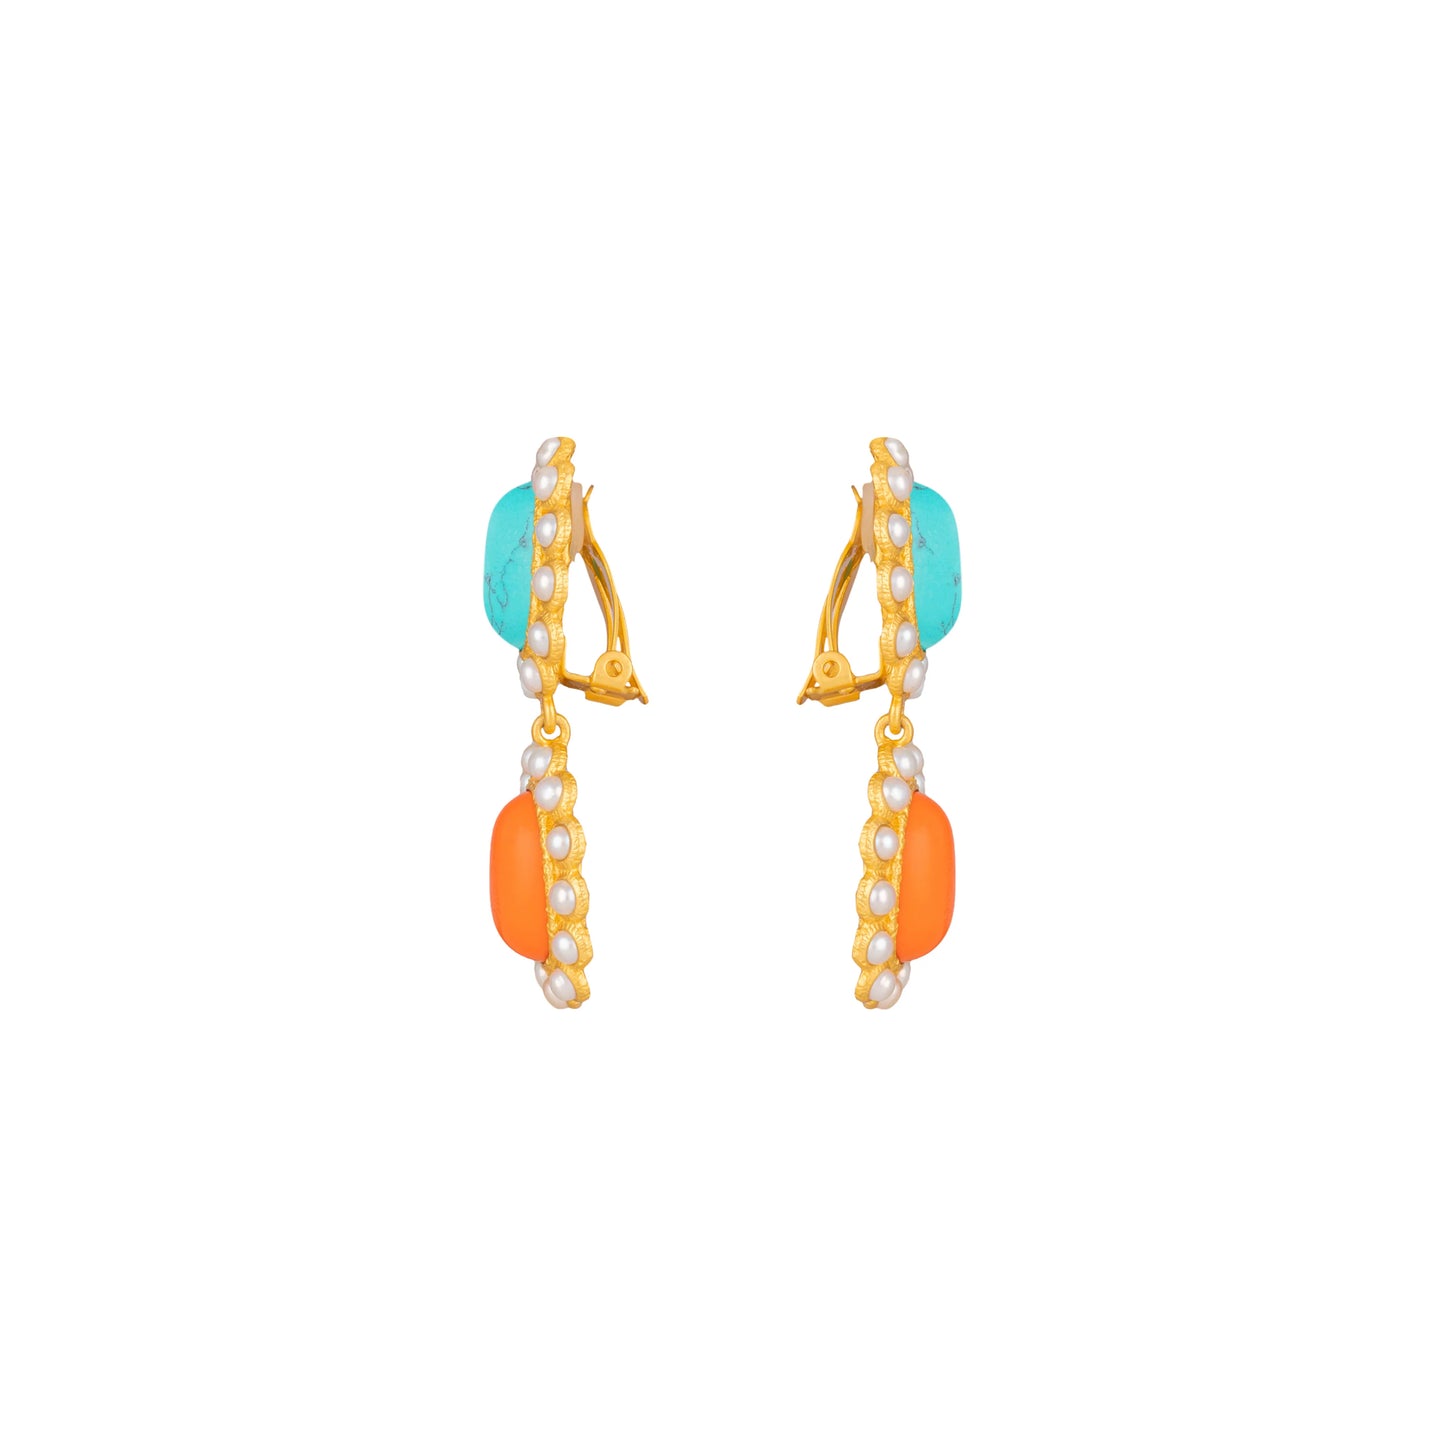 Ada Earrings Orange Coral and Turquoise